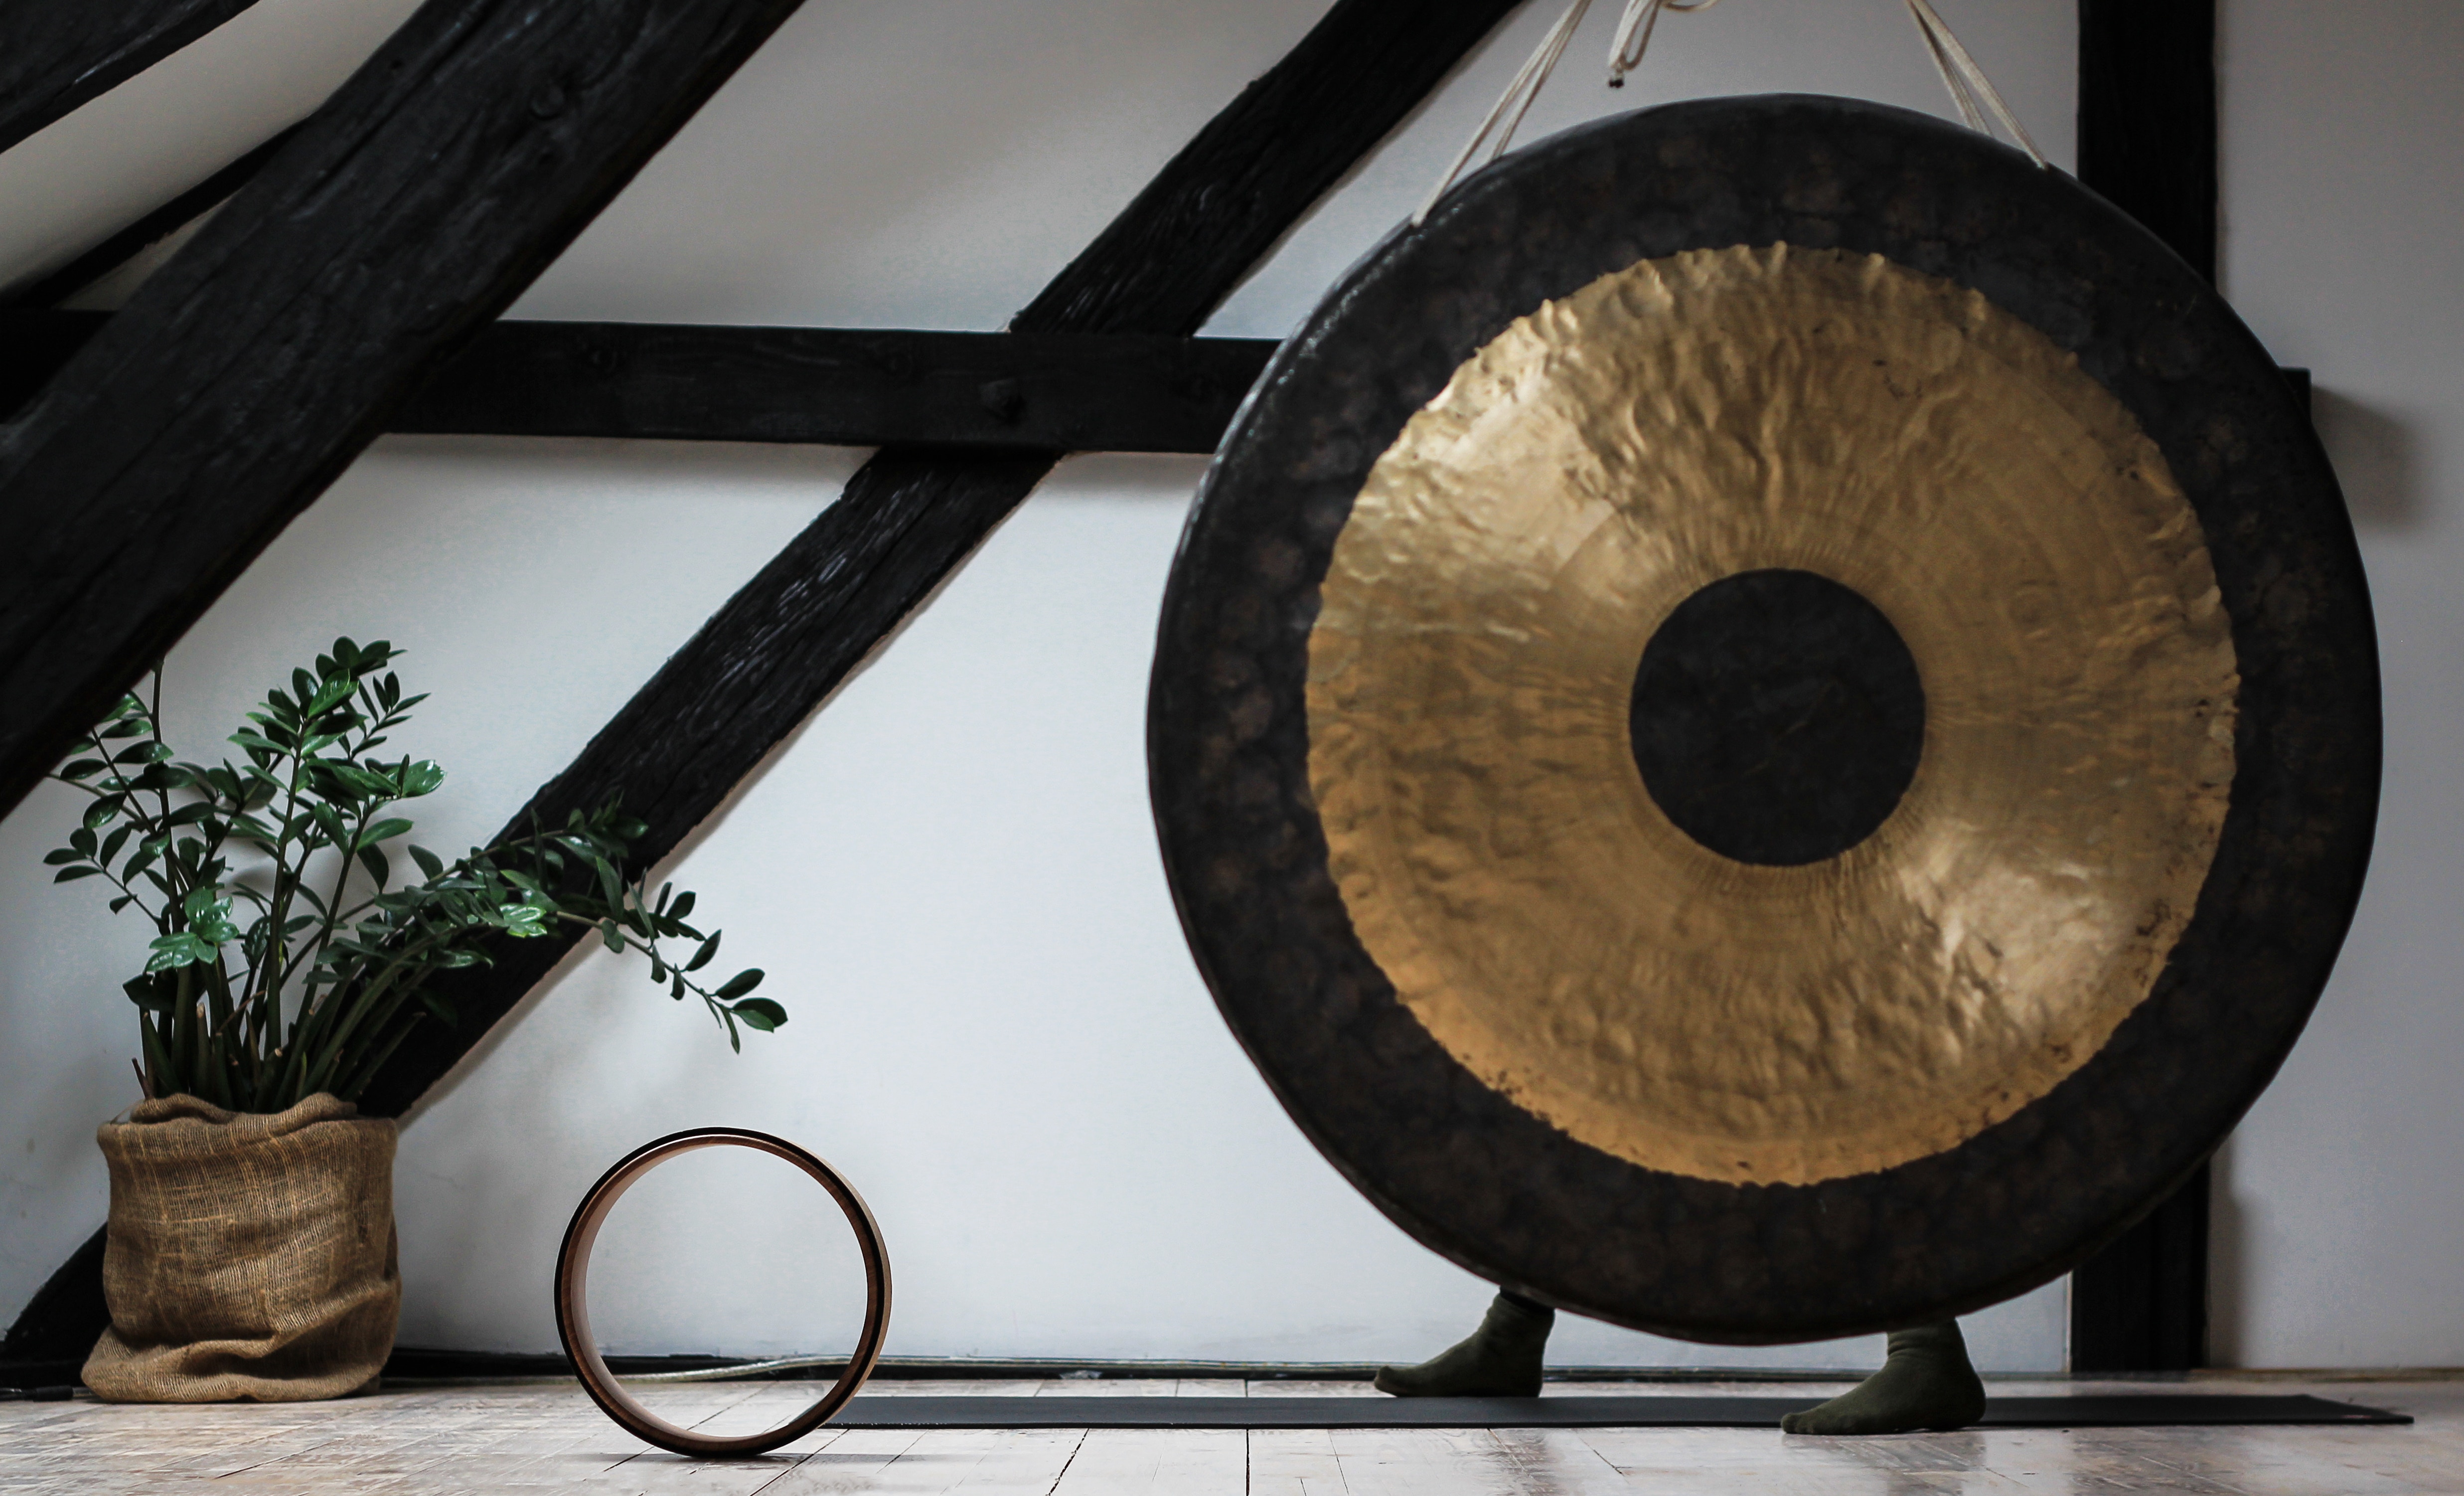 BICESTER,OXFORDSHIRE - Gong Sound Bath